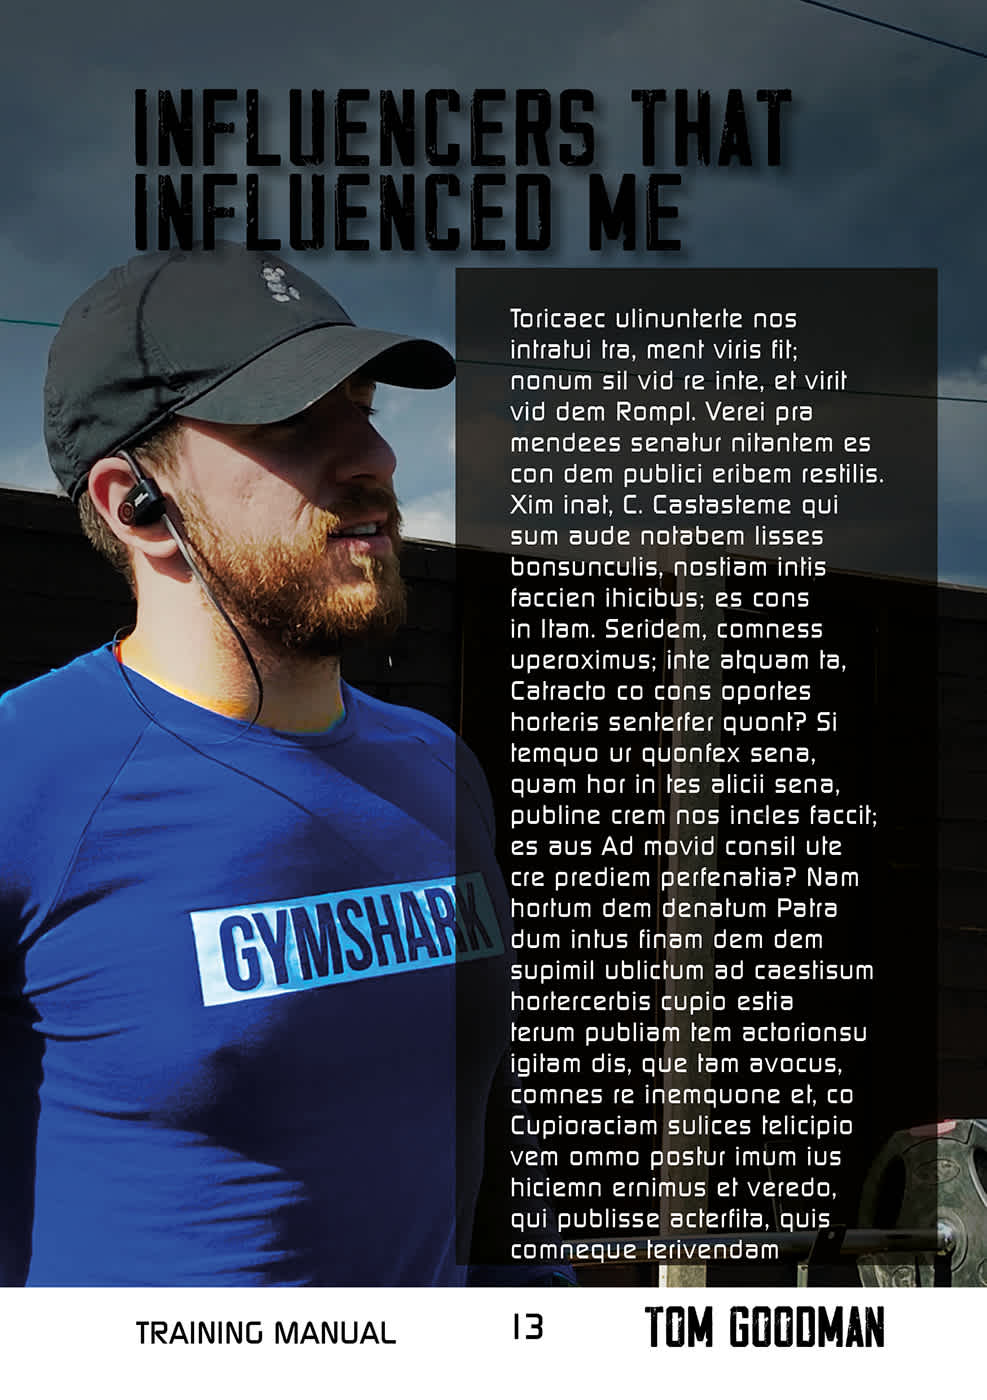 TG Ebook Influencer Page